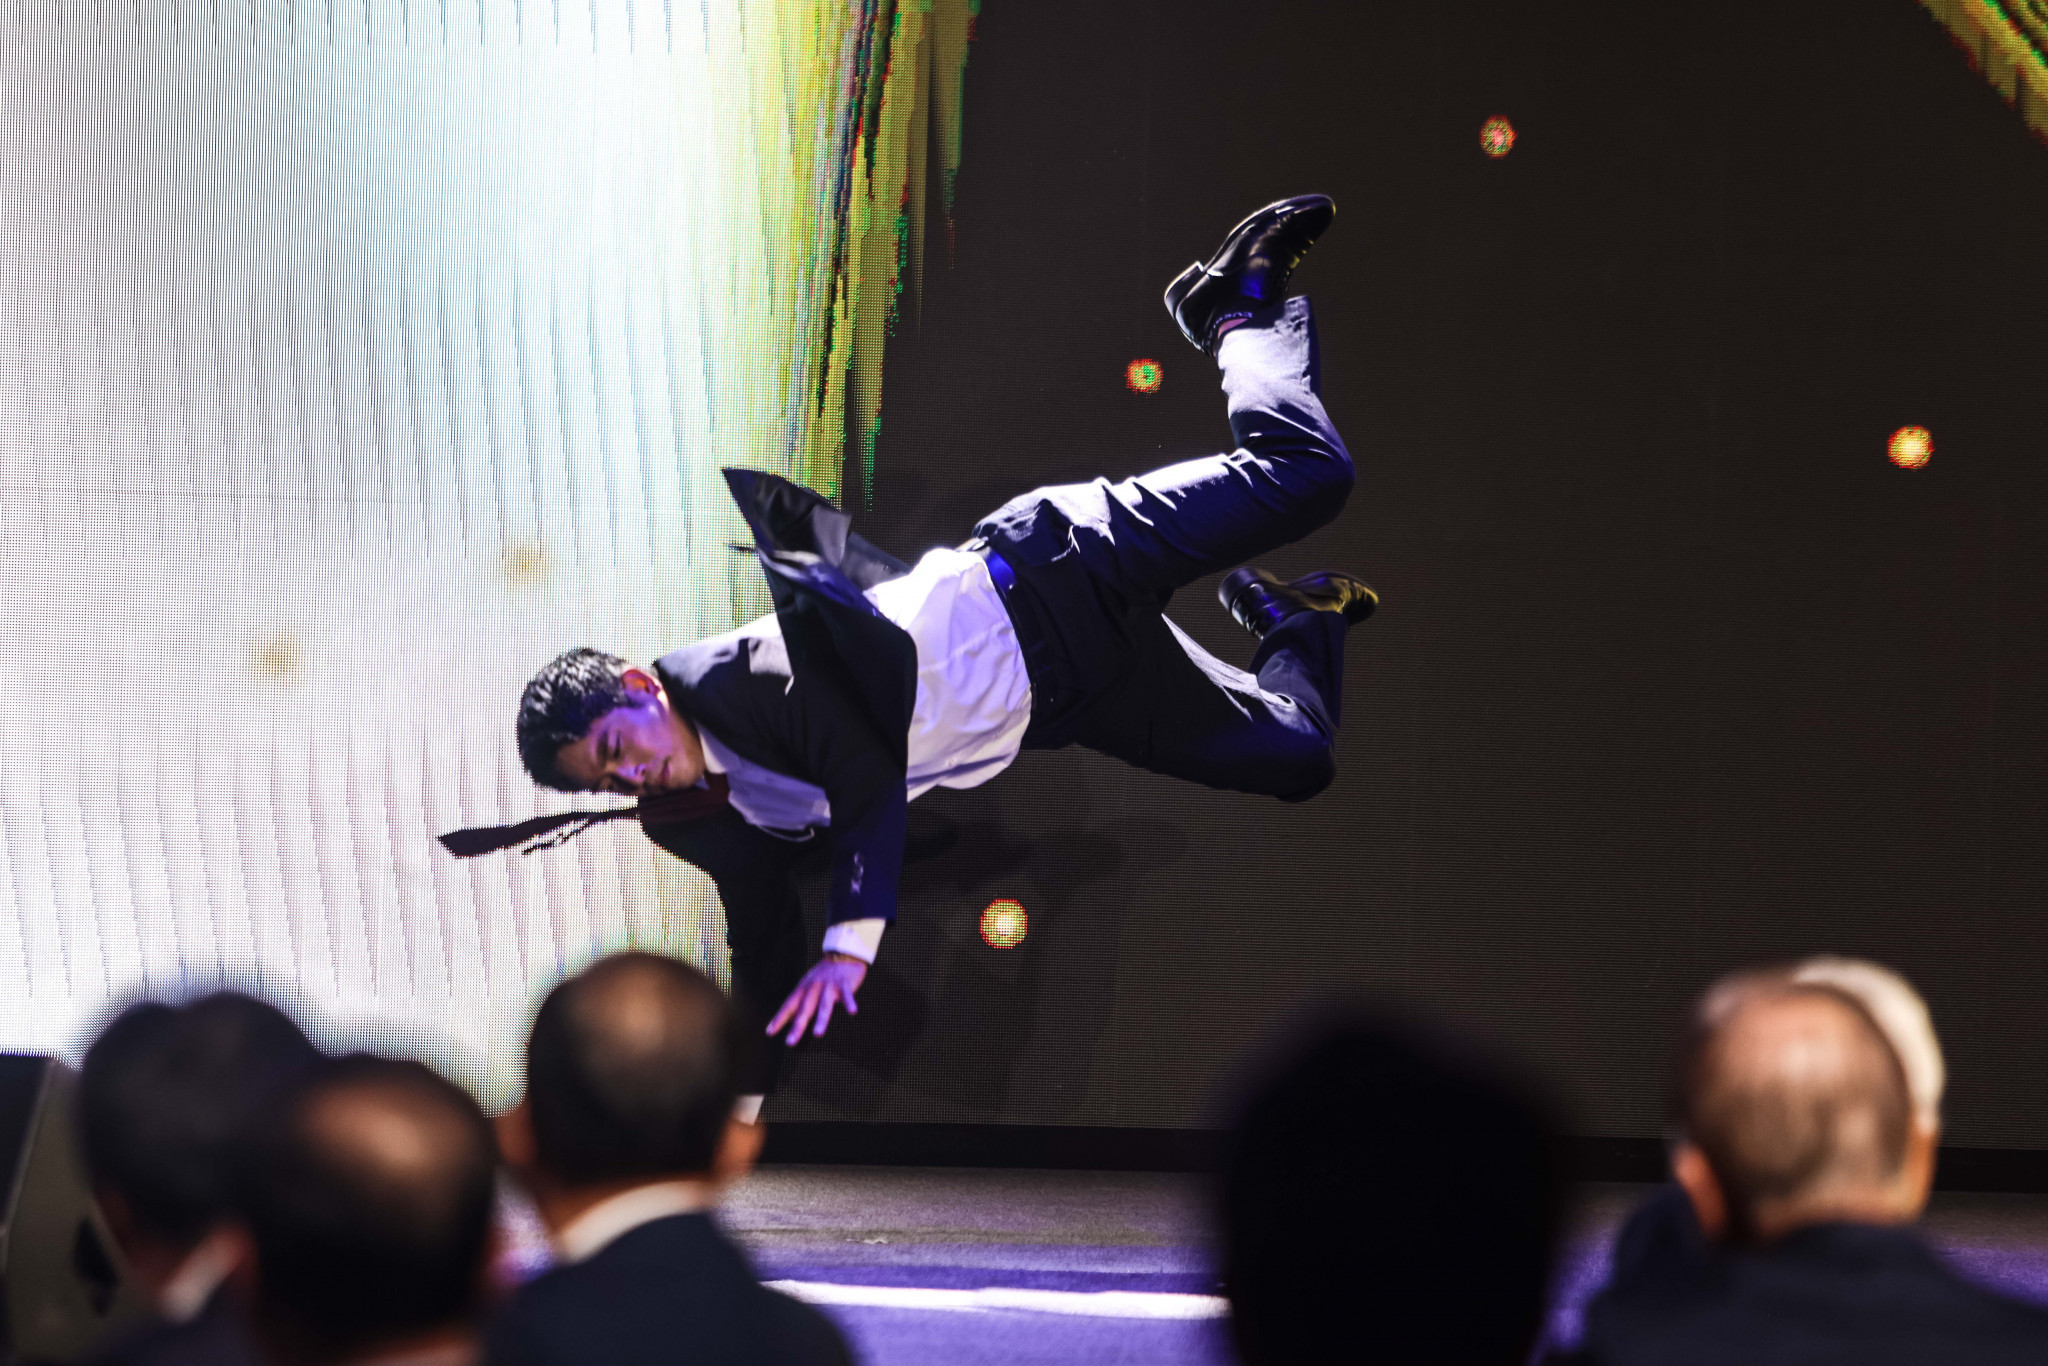 Among the performances on the night included break dancers and K-pop band ©ANOC